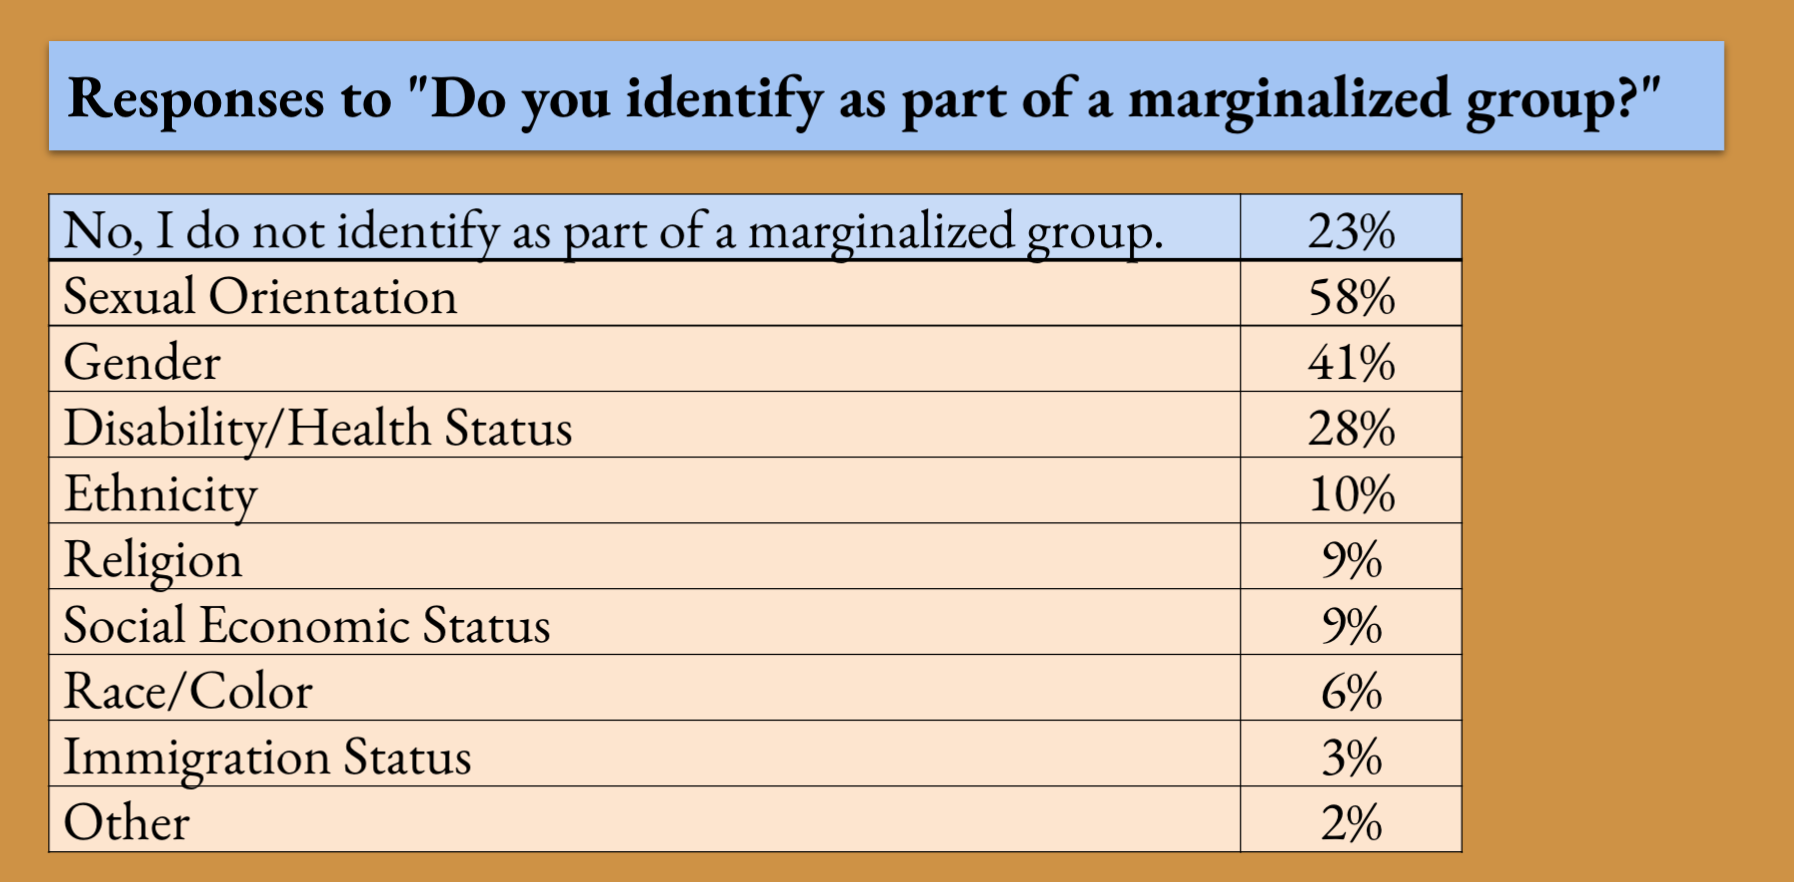 Data show that most readers and writers of Tolkien-based fanfiction identify as marginalized most often based on sexual orientation, gender, and disability and health status